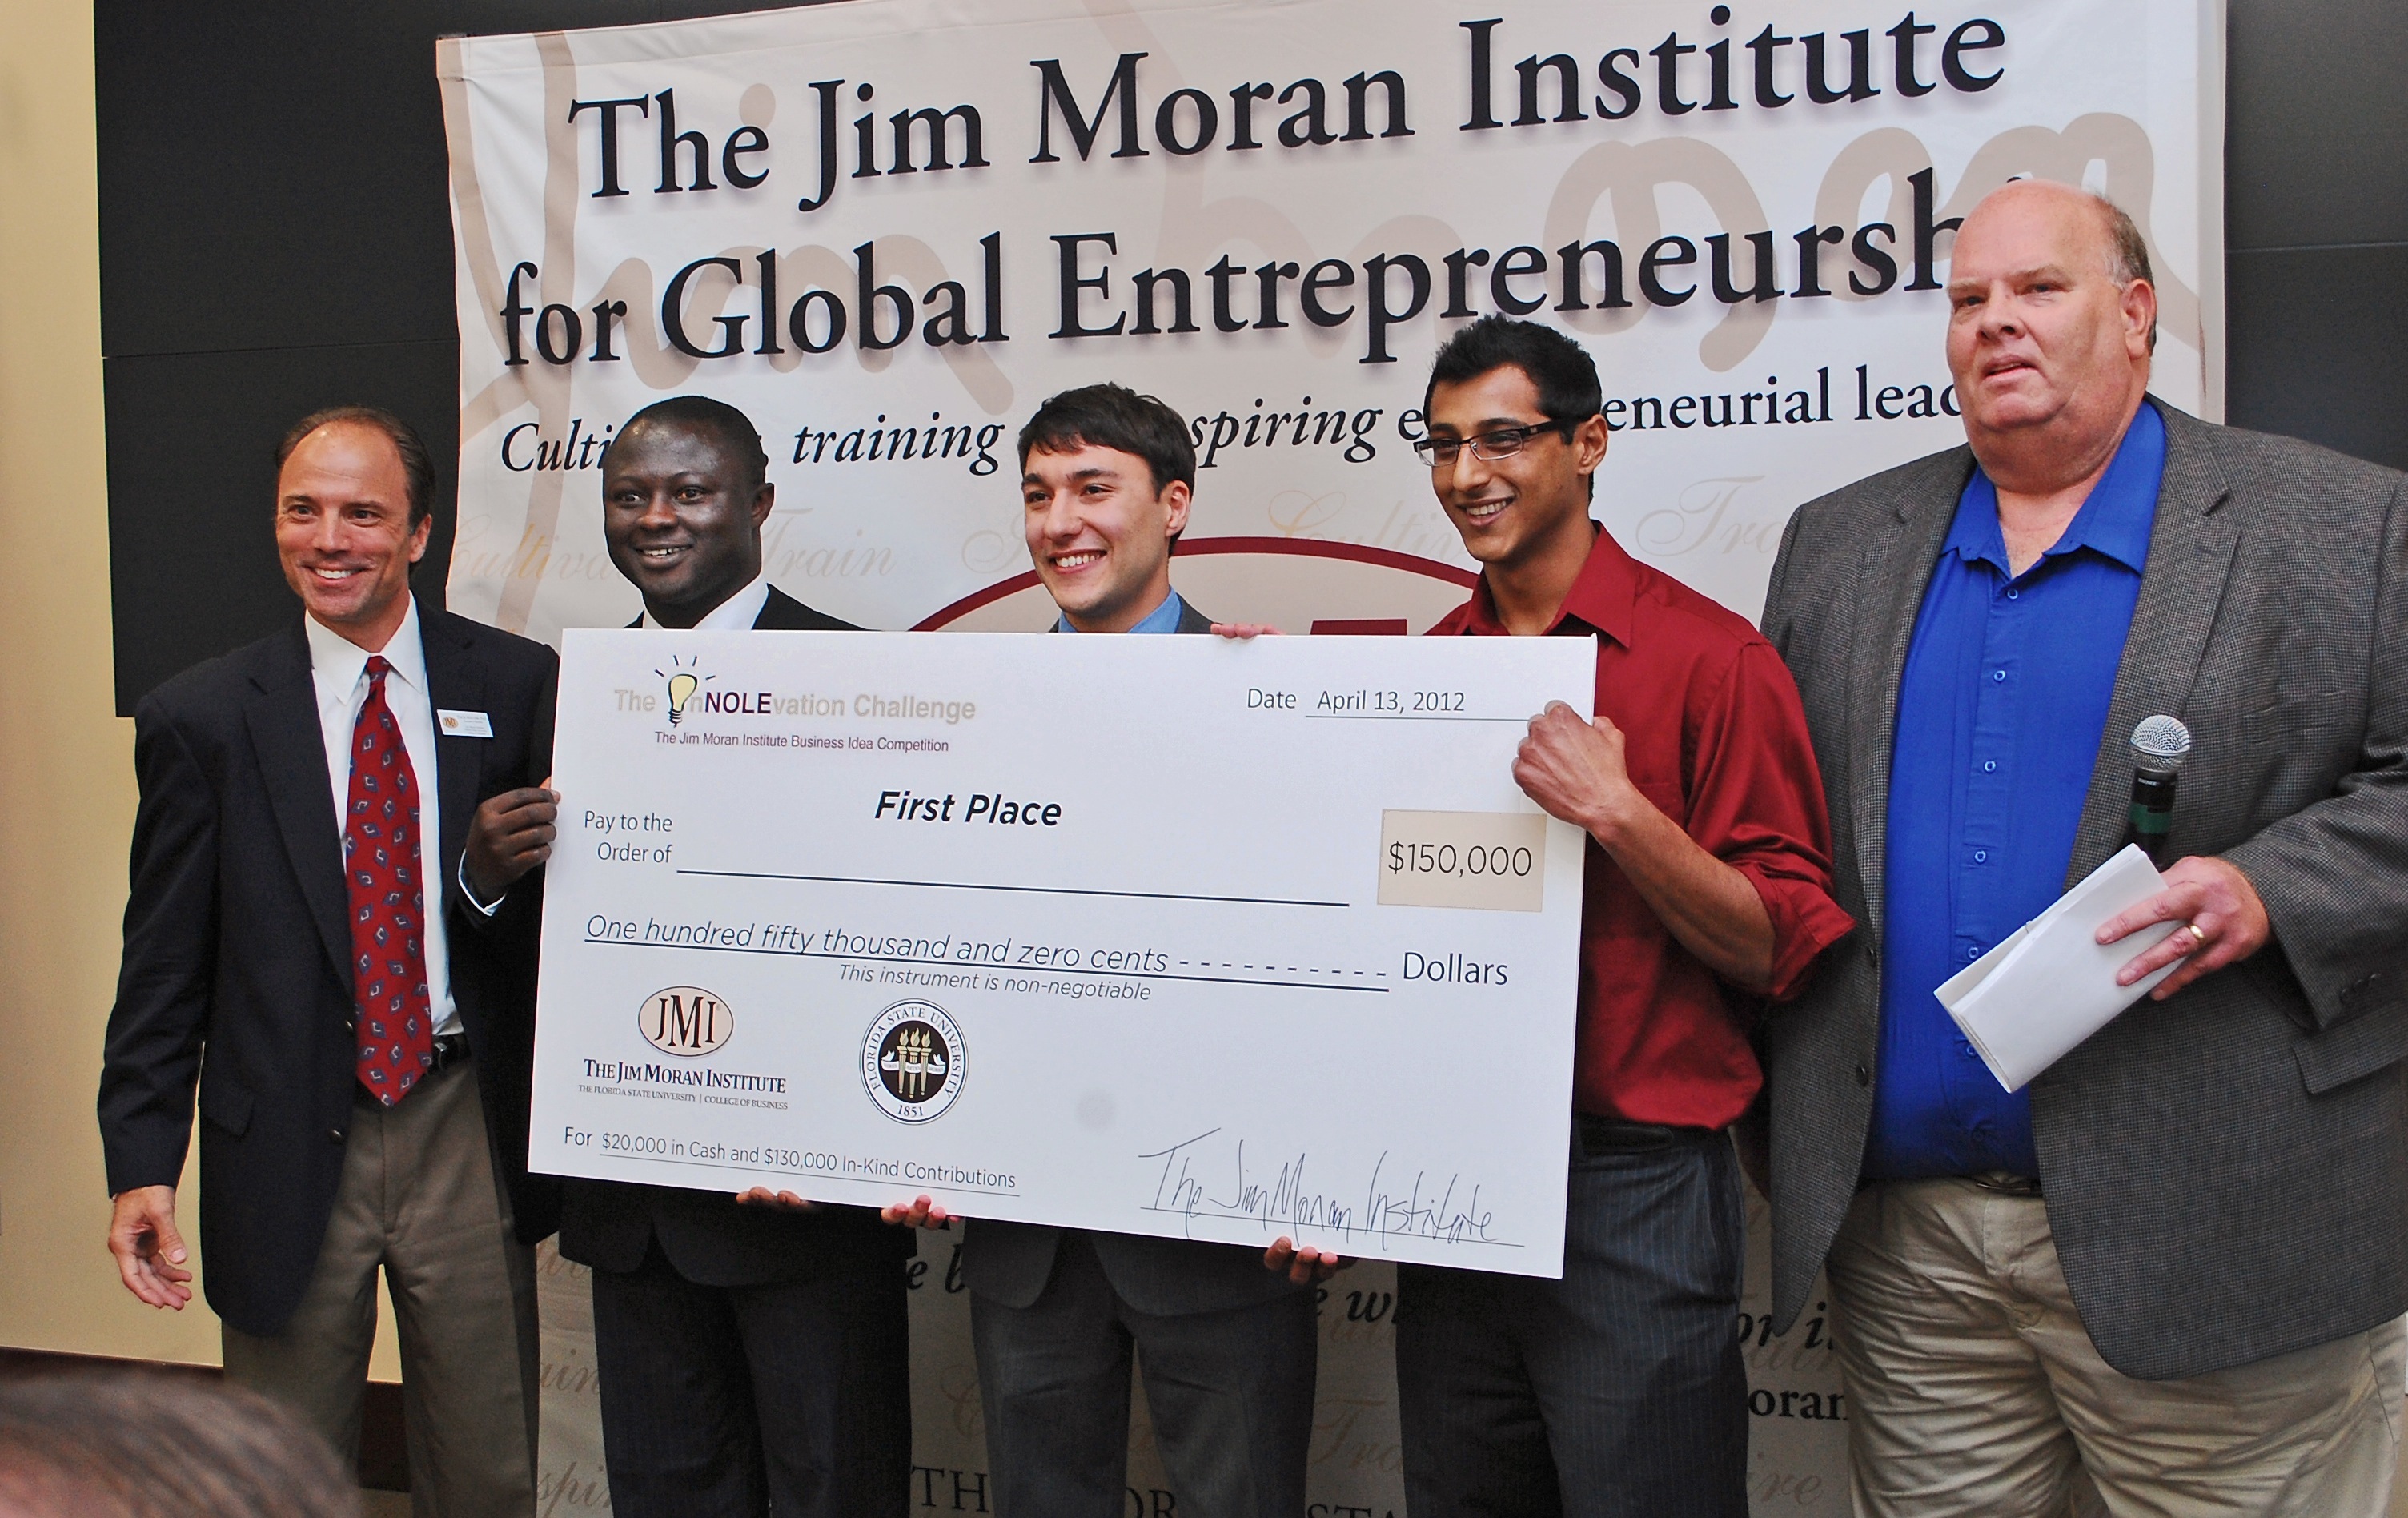 Winners of the InNOLEvation challenge and a $150,000 grand prize are, second from left, Aubrey Kusi-Appiah and Nicholas Vafai, both biological science graduate students, and Sohail Merchant, a senior in biological science. At far left is Tim Holcomb, executive director of The Jim Moran Institute for Global Entrepreneurship, and at far right is Ron Frazier, entrepreneur-in-residence at The Jim Moran Institute and InNolevation Challenge adviser.